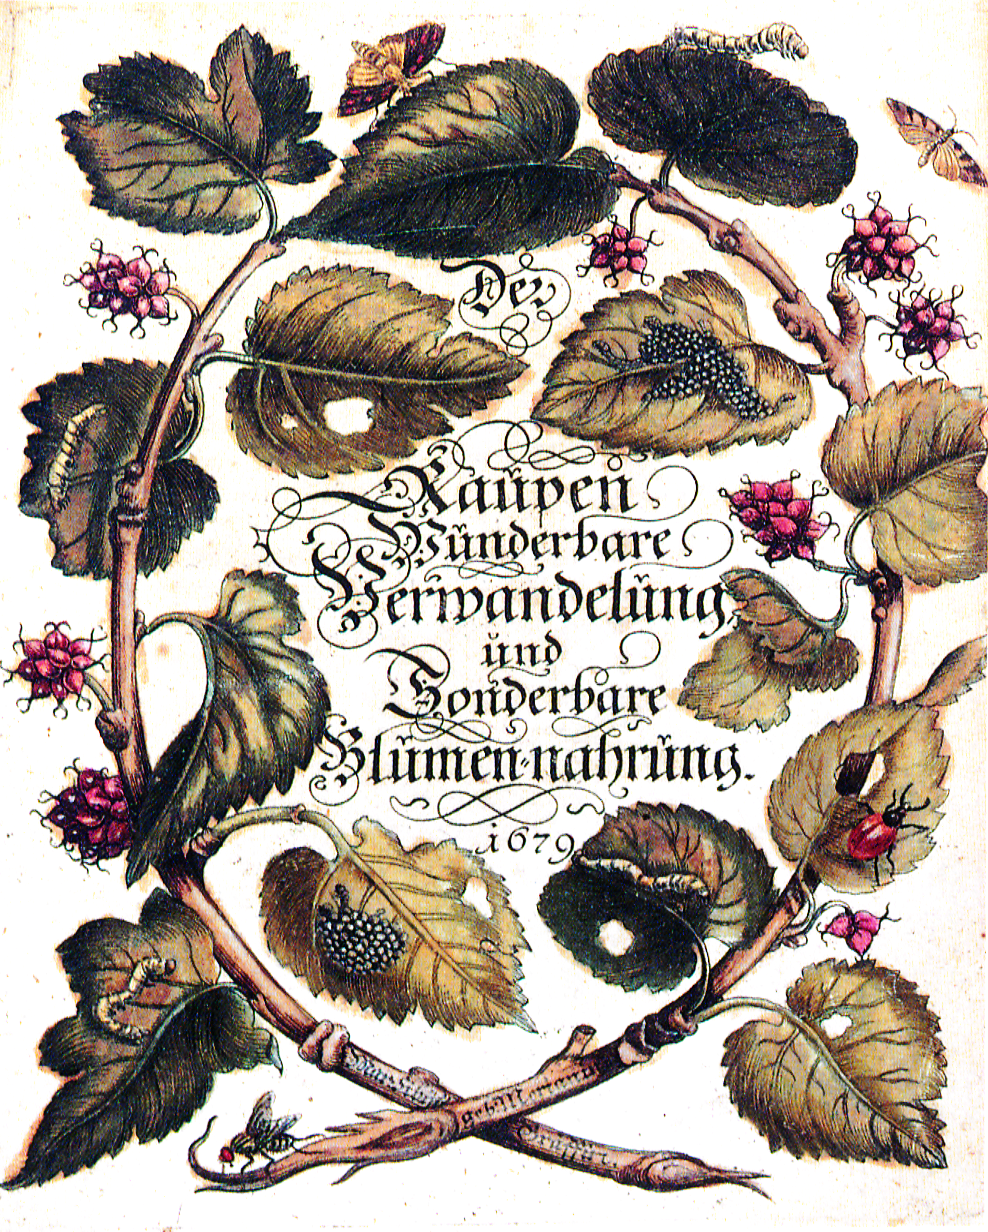 Book cover with an illustration of twig curling in an oval shape on which red berries and chewed up green leaves are growing. Sitting on the leaves are caterpillars, flies, bugs, etc. The title is positioned in the middle in a serpentine font.